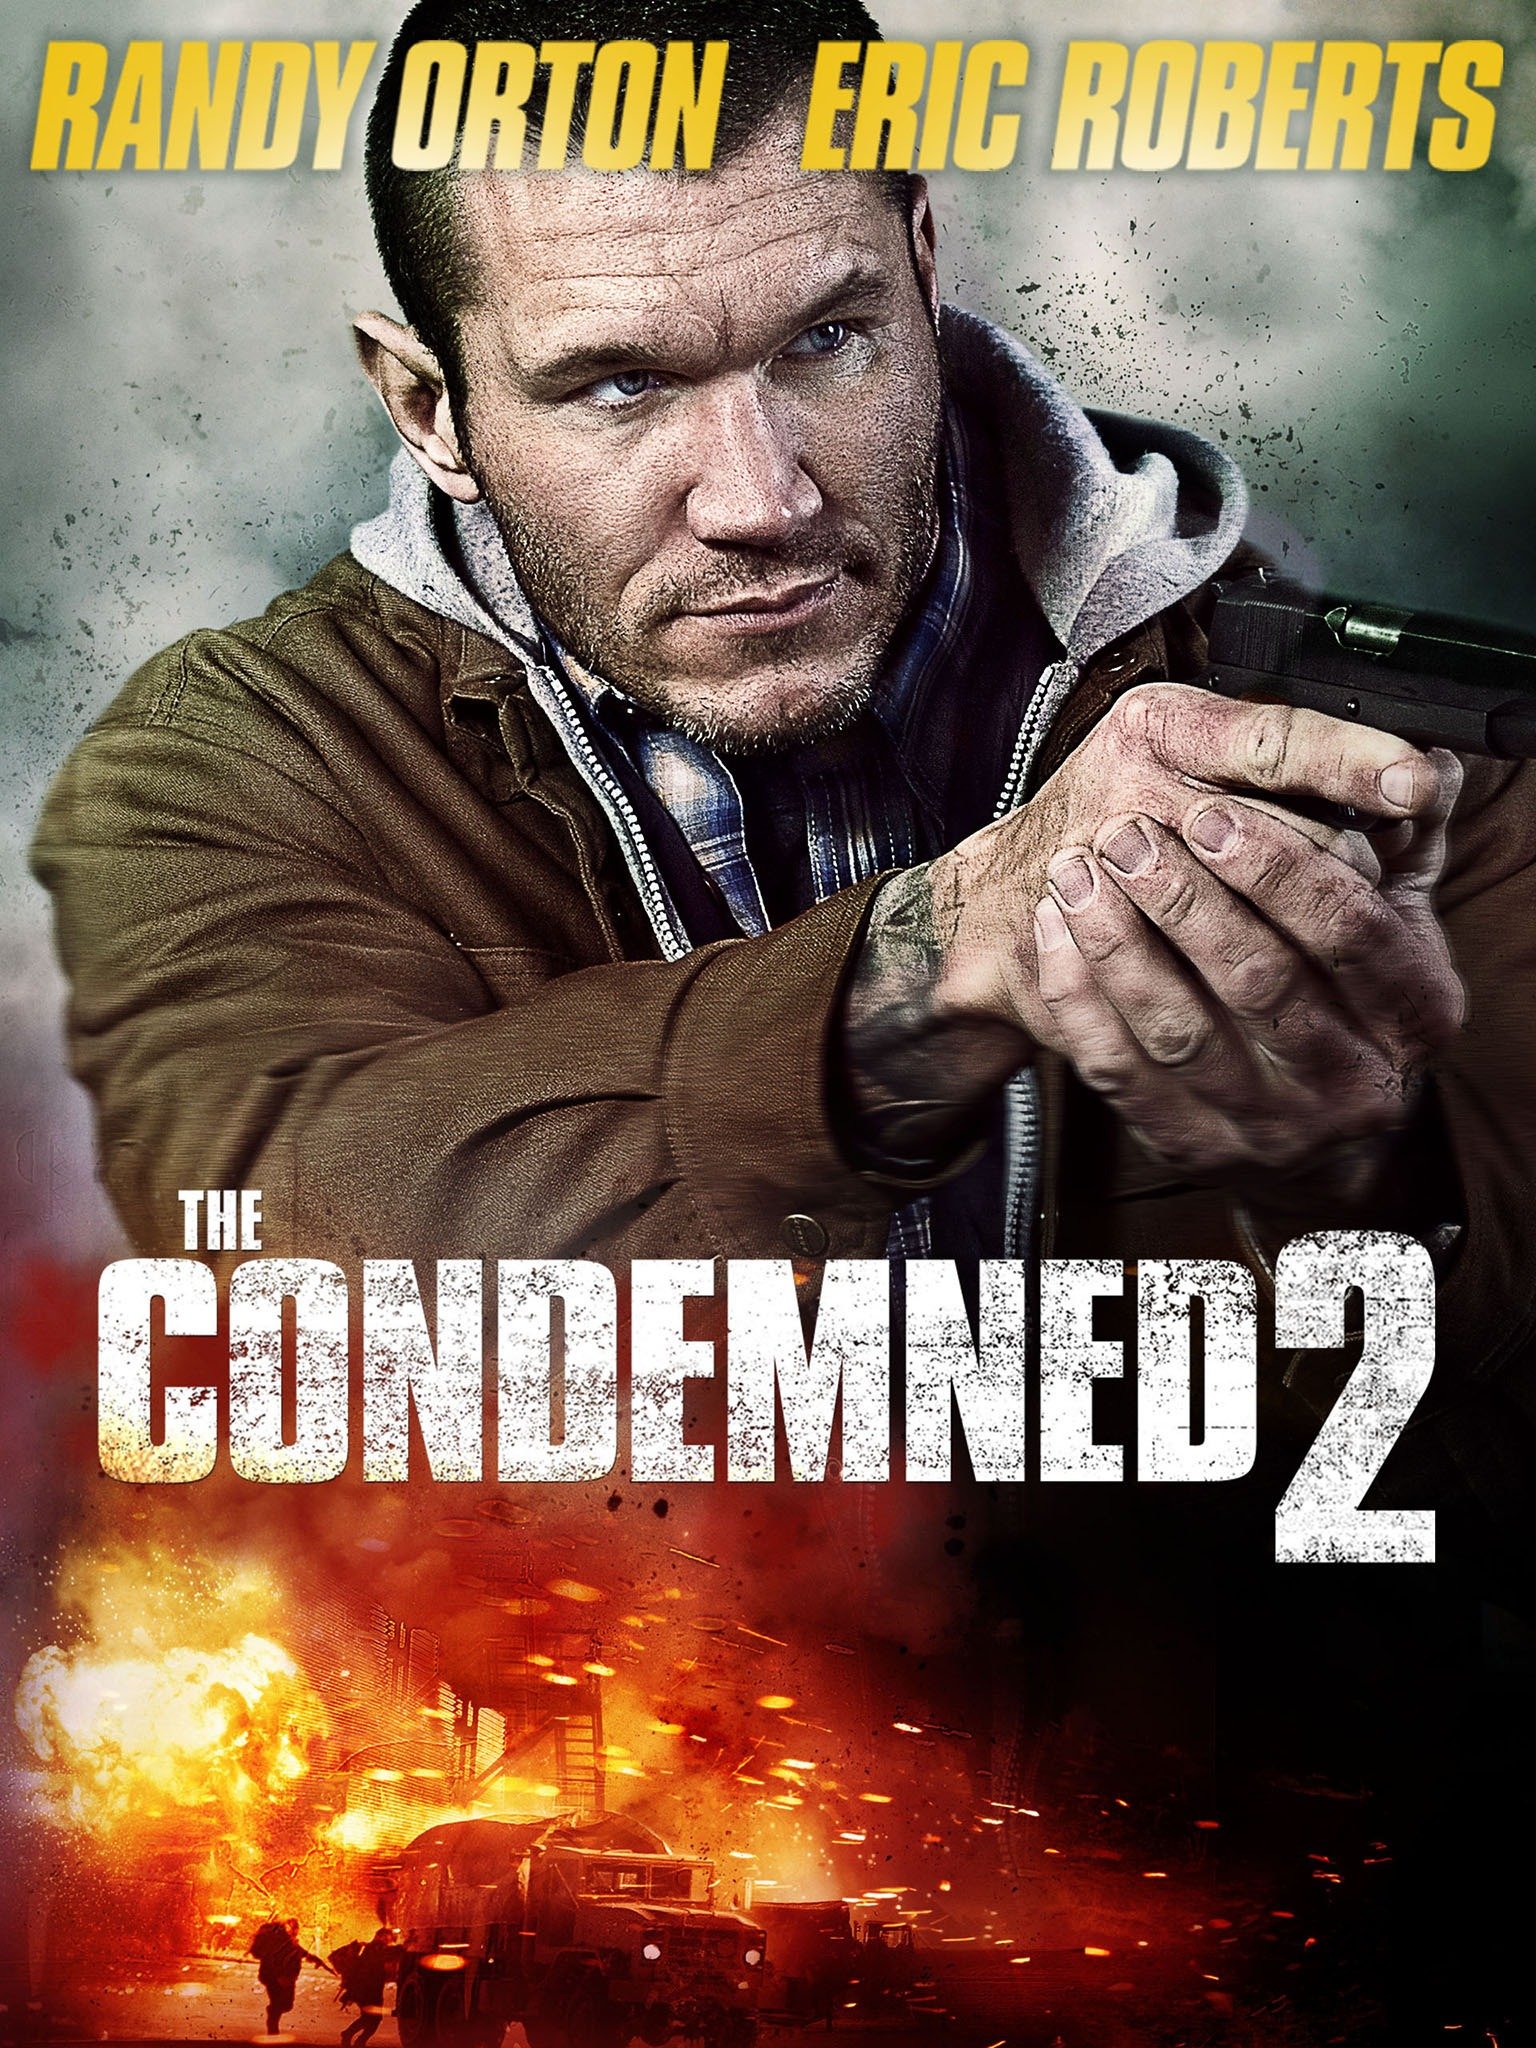 download condemned 2